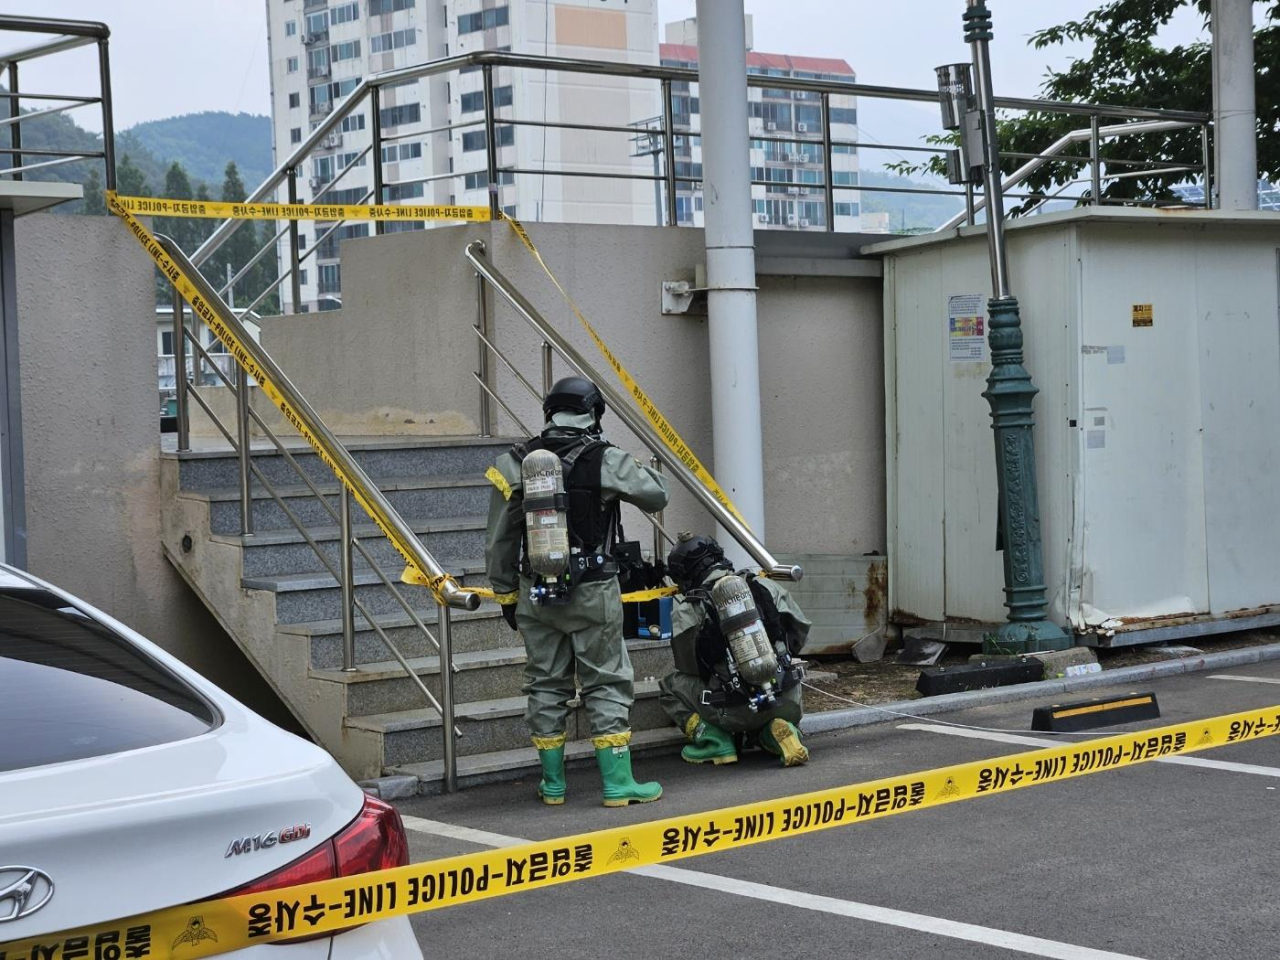 Officials from the South Korean military and police arrive at the scene where a suspicious international package has been delivered in Haman-gun, South Gyeongsang Province, Friday. (Yonhap)